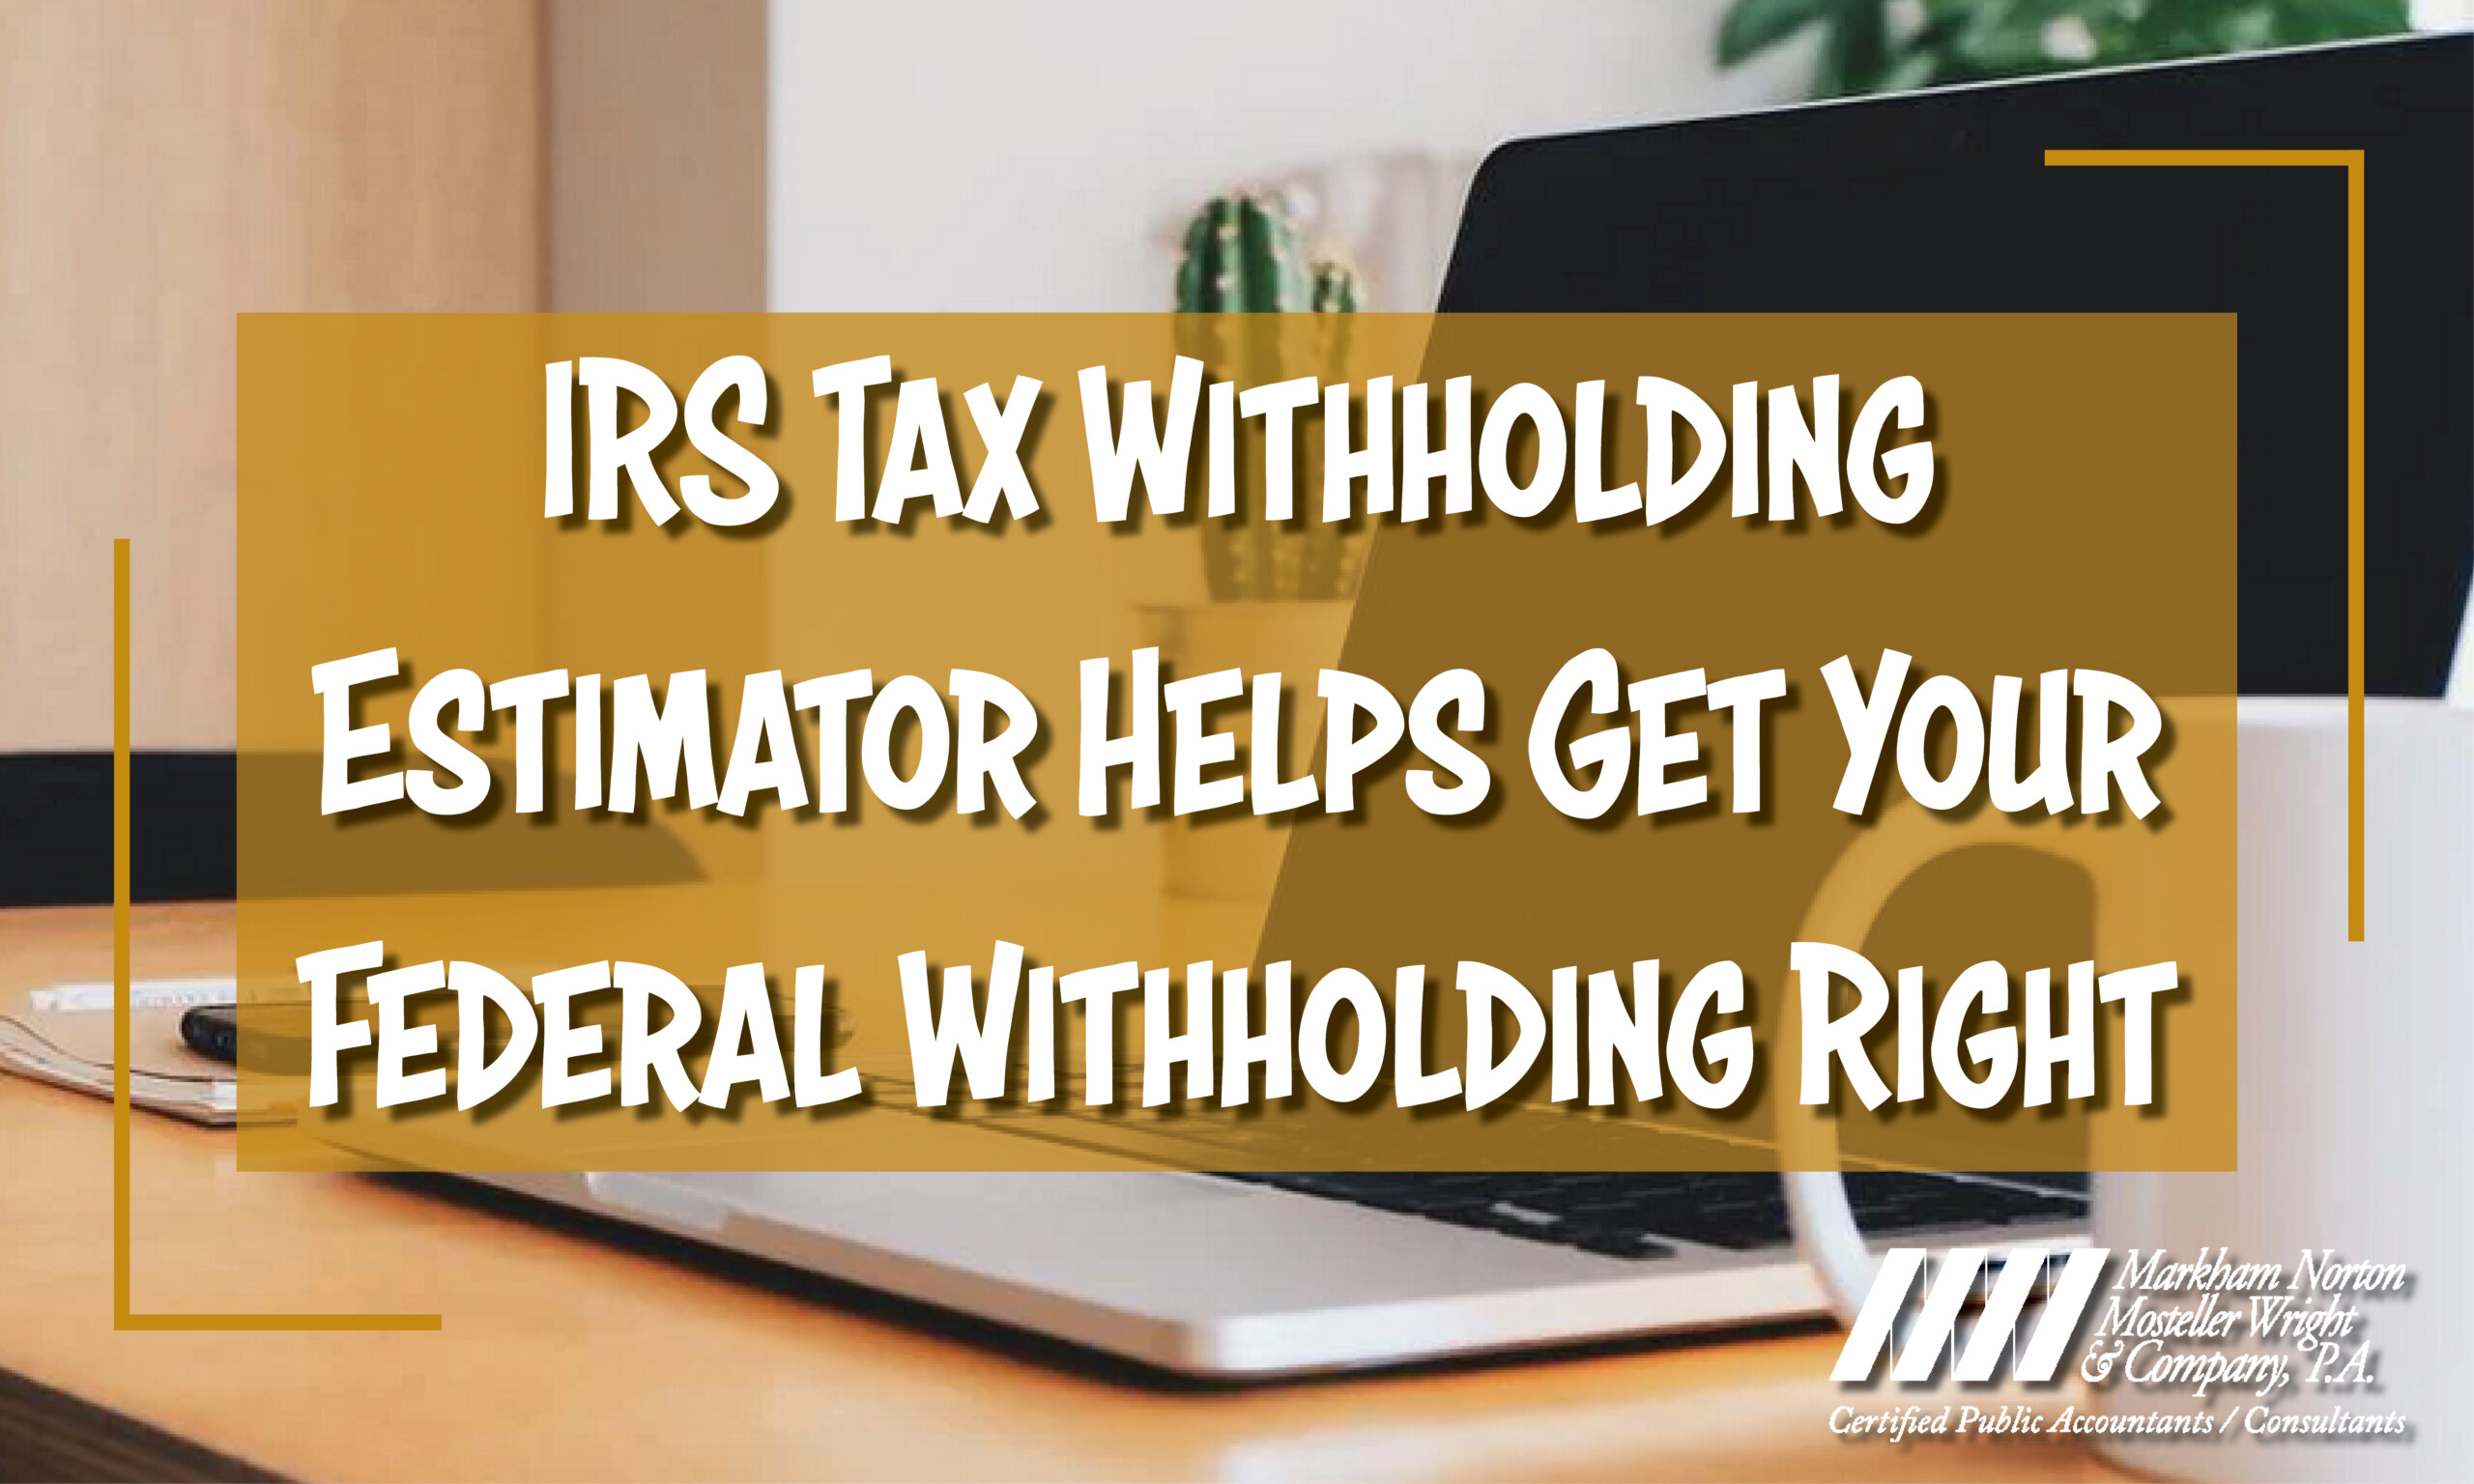 IRS Tax Withholding